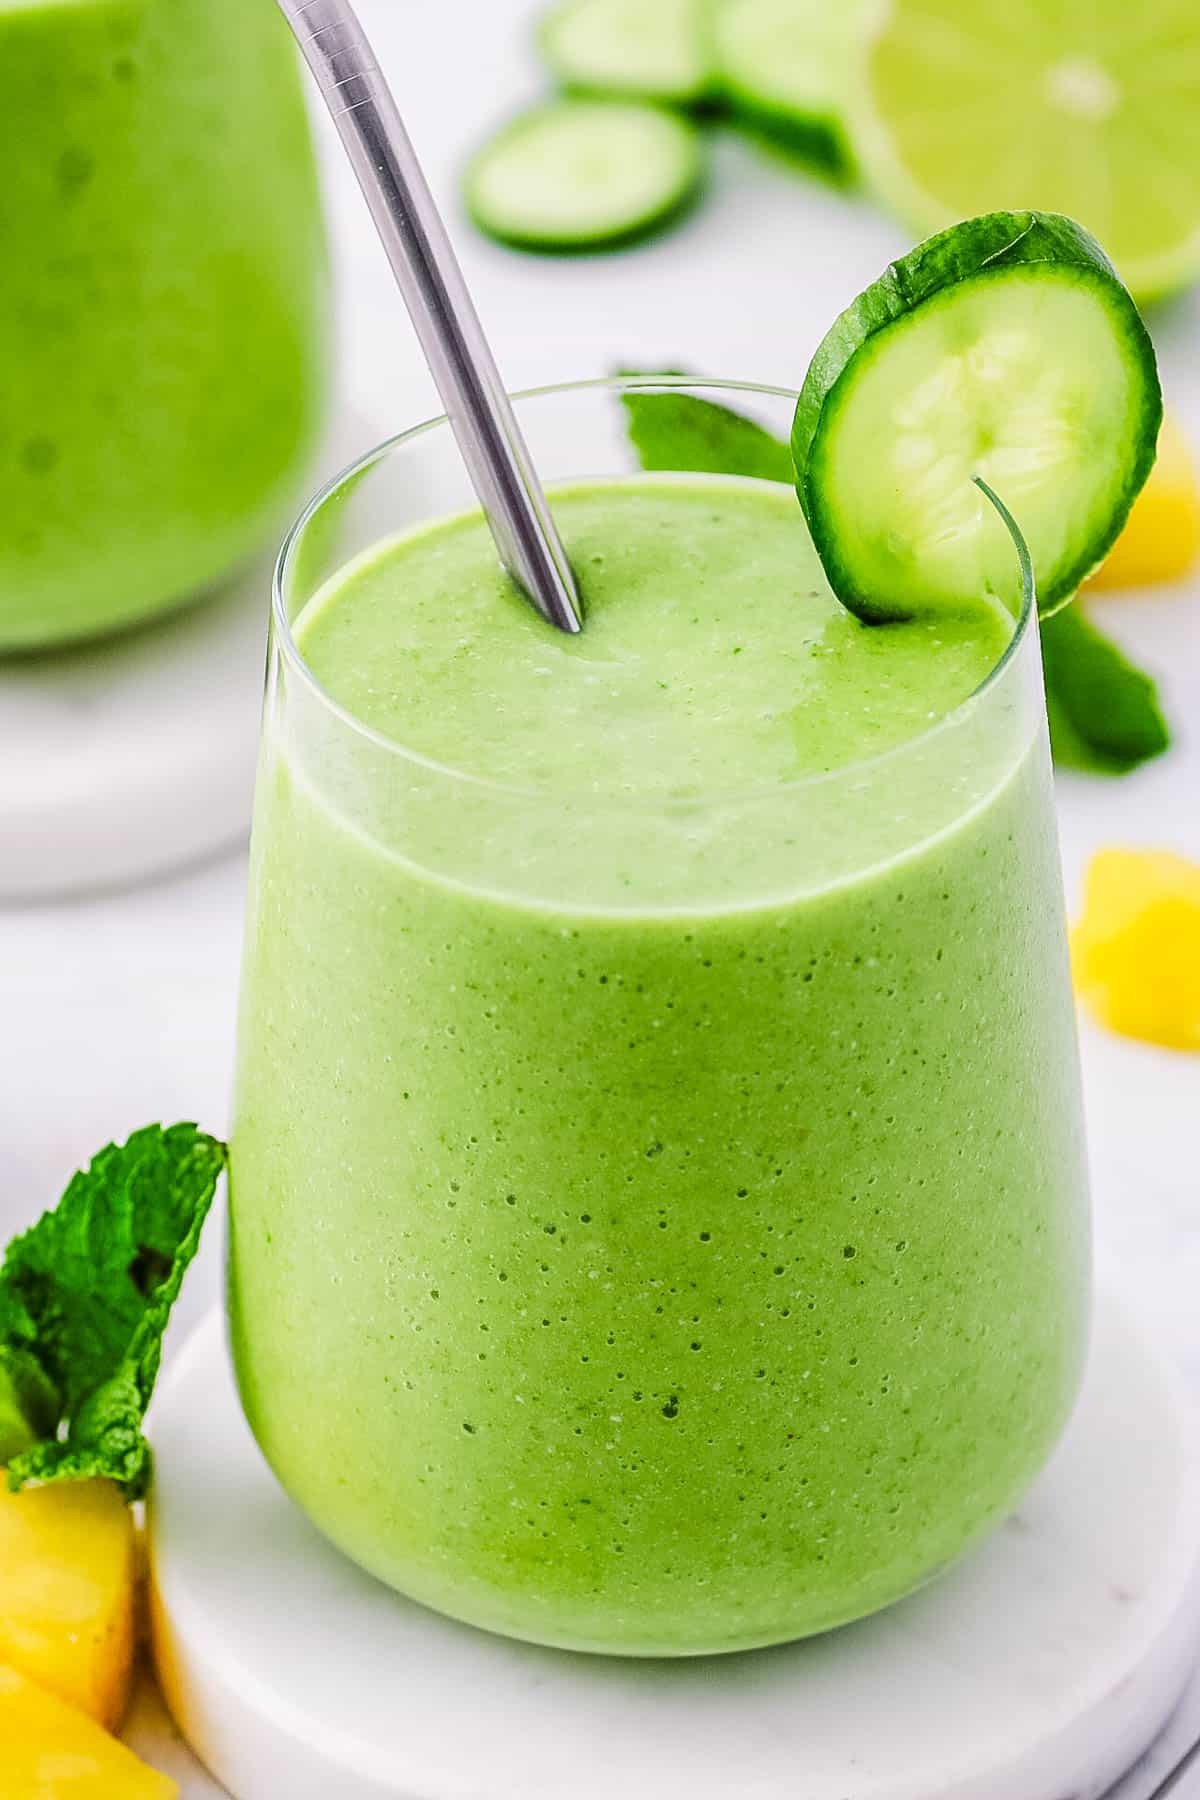 Cucumber pineapple smoothie served in a glass with a straw.